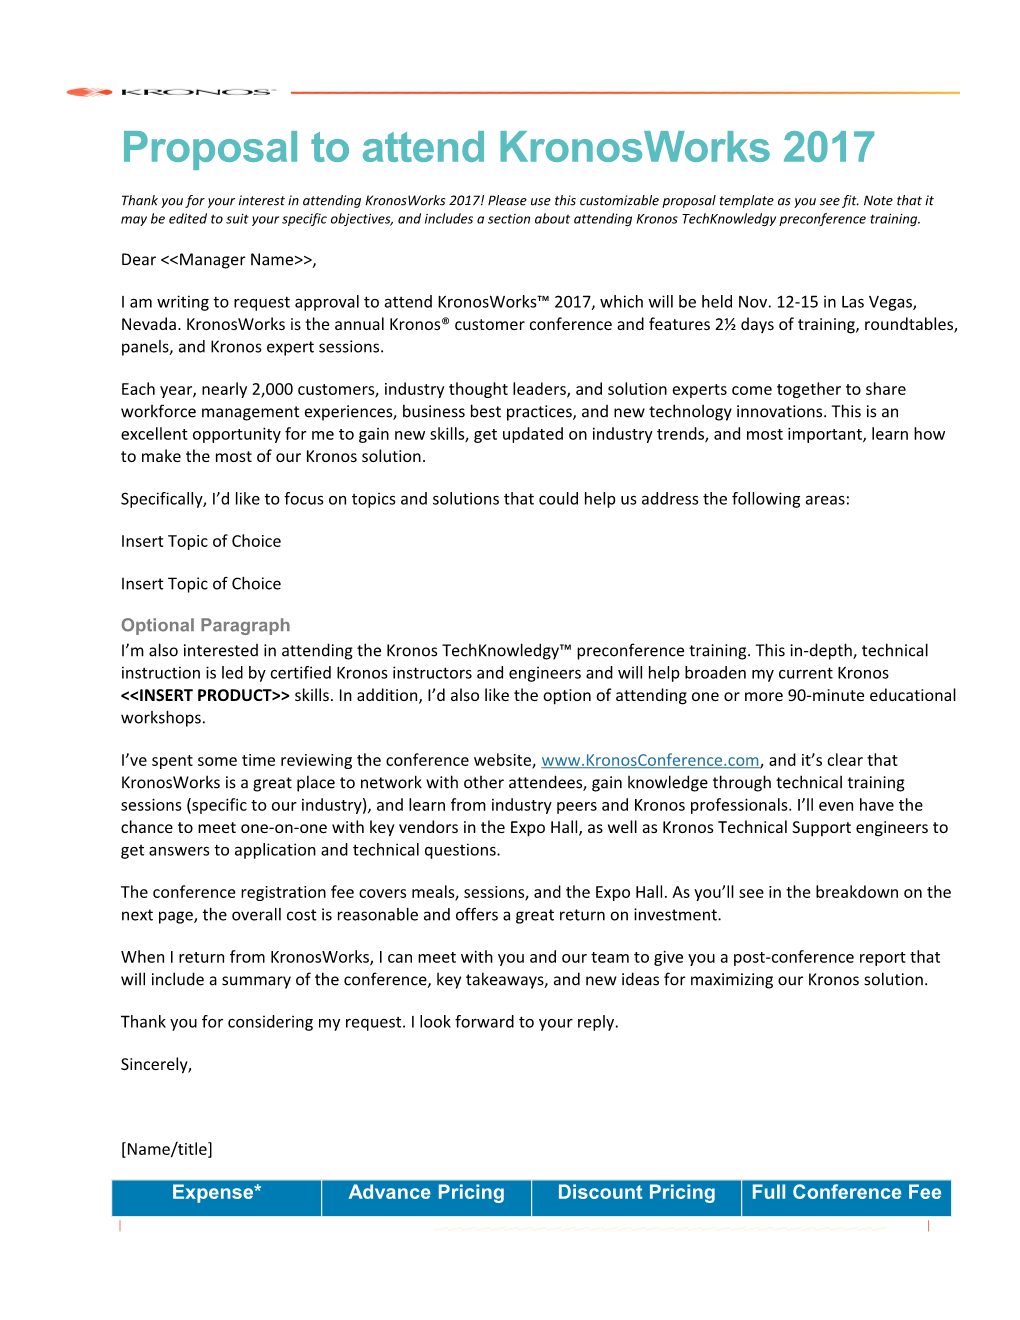 Proposal to Attend Kronosworks 2017